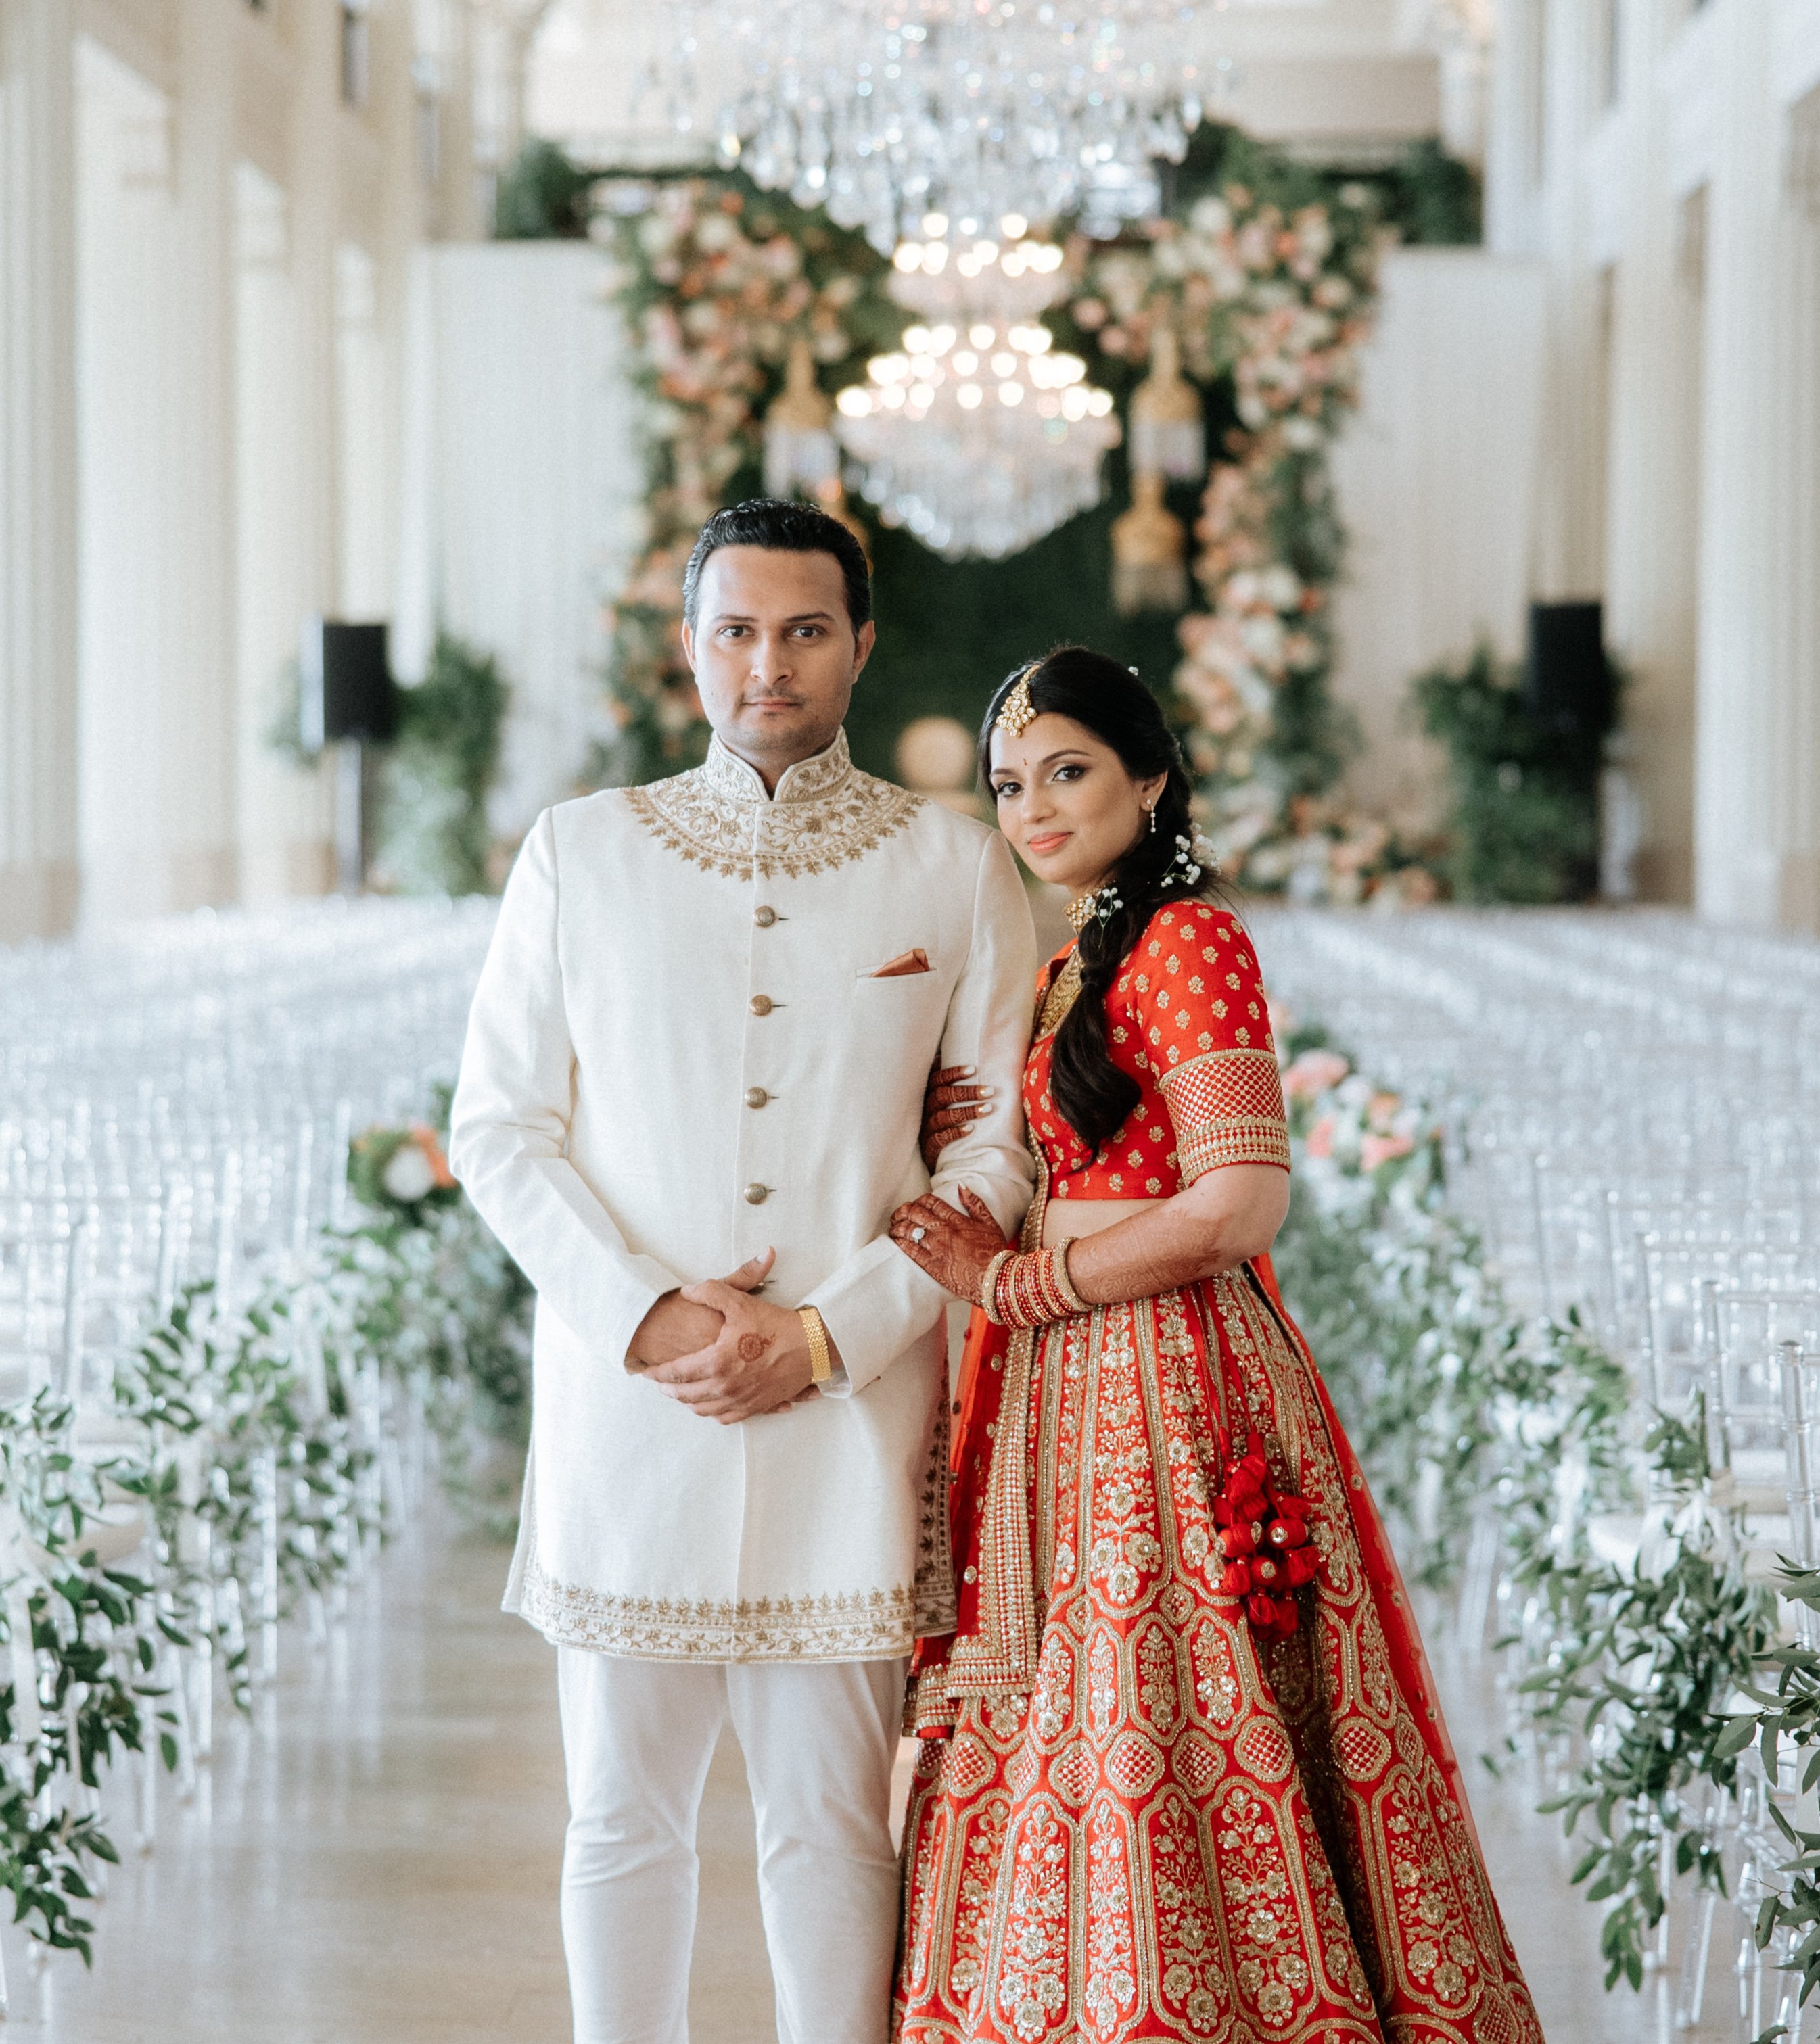 The bride and groom pose for the camera in the ballroom of their Hindu wedding ceremony. 